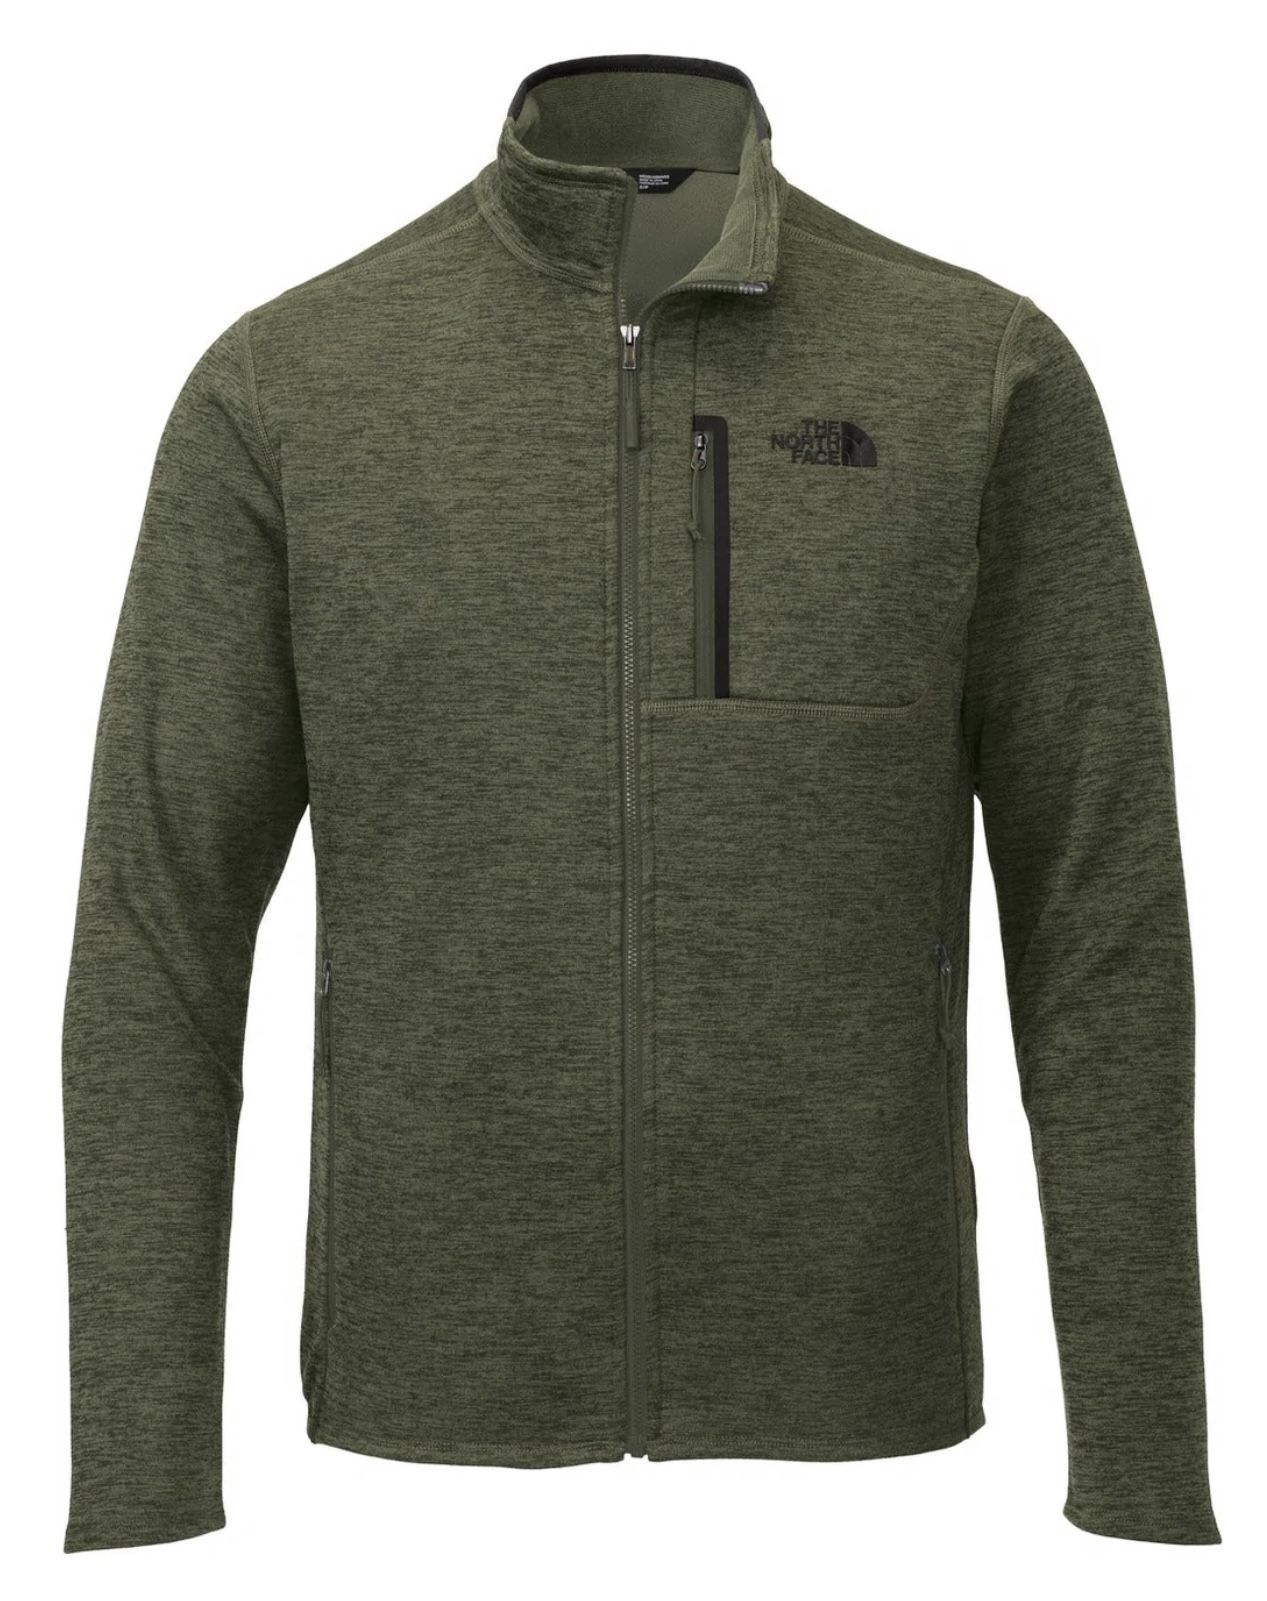 The North Face Men’s Jacket 